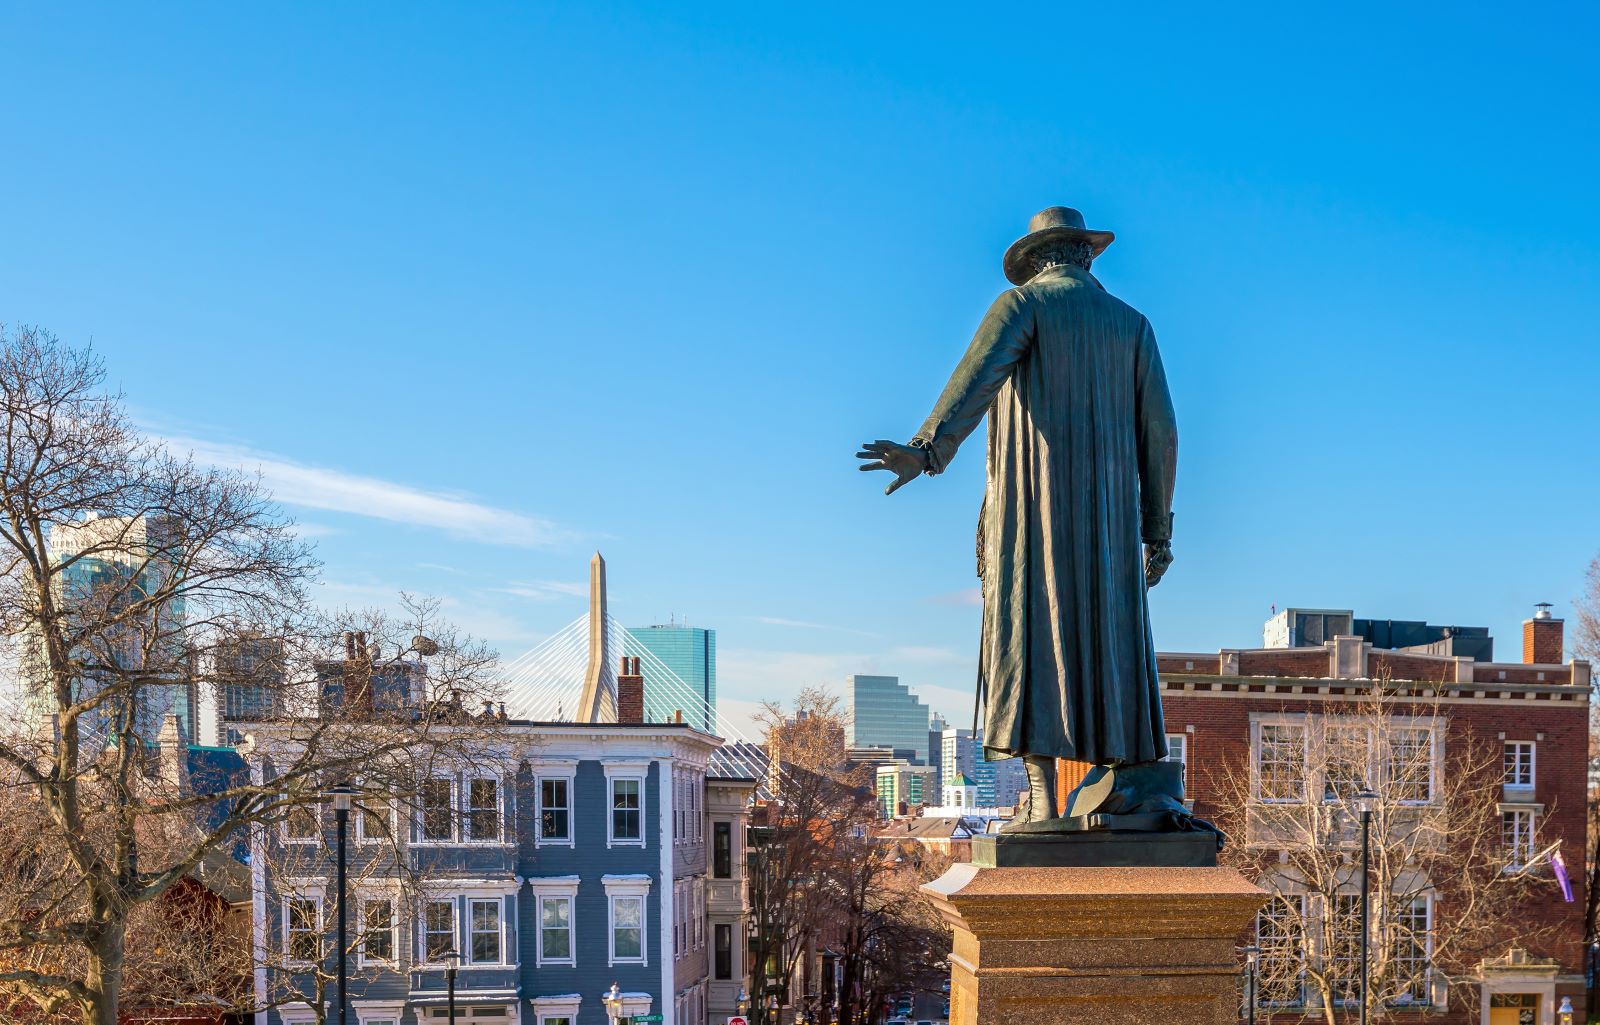 <p class="wp-caption-text">Image Credit: Shutterstock / f11photo</p>  <p>Climb the 294 steps of the Bunker Hill Monument for panoramic views of Boston. The battle fought here was a turning point in the American Revolution.</p>